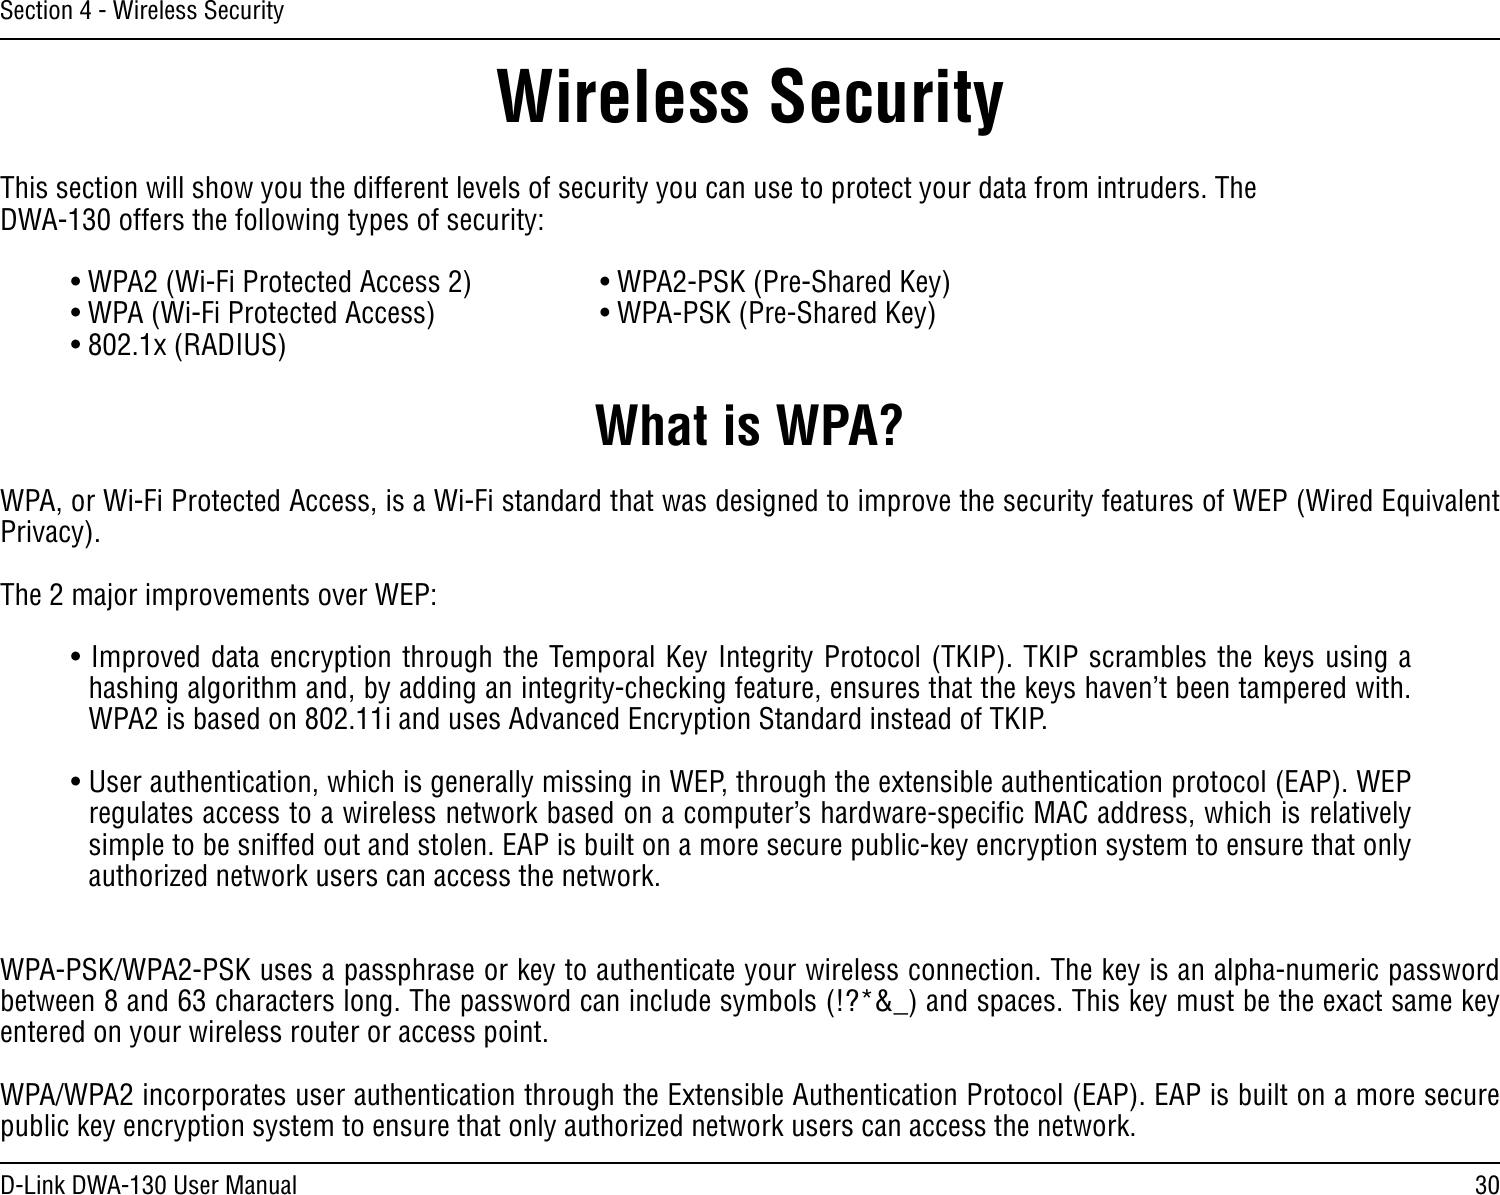 30D-Link DWA-130 User ManualSection 4 - Wireless SecurityWireless SecurityThis section will show you the different levels of security you can use to protect your data from intruders. The DWA-130 offers the following types of security:• WPA2 (Wi-Fi Protected Access 2)     • WPA2-PSK (Pre-Shared Key)• WPA (Wi-Fi Protected Access)      • WPA-PSK (Pre-Shared Key)• 802.1x (RADIUS)What is WPA?WPA, or Wi-Fi Protected Access, is a Wi-Fi standard that was designed to improve the security features of WEP (Wired Equivalent Privacy).  The 2 major improvements over WEP: • Improved data encryption through the Temporal Key Integrity Protocol (TKIP). TKIP scrambles the keys using a hashing algorithm and, by adding an integrity-checking feature, ensures that the keys haven’t been tampered with. WPA2 is based on 802.11i and uses Advanced Encryption Standard instead of TKIP.• User authentication, which is generally missing in WEP, through the extensible authentication protocol (EAP). WEP regulates access to a wireless network based on a computer’s hardware-speciﬁc MAC address, which is relatively simple to be sniffed out and stolen. EAP is built on a more secure public-key encryption system to ensure that only authorized network users can access the network.WPA-PSK/WPA2-PSK uses a passphrase or key to authenticate your wireless connection. The key is an alpha-numeric password between 8 and 63 characters long. The password can include symbols (!?*&amp;_) and spaces. This key must be the exact same key entered on your wireless router or access point.WPA/WPA2 incorporates user authentication through the Extensible Authentication Protocol (EAP). EAP is built on a more secure public key encryption system to ensure that only authorized network users can access the network.